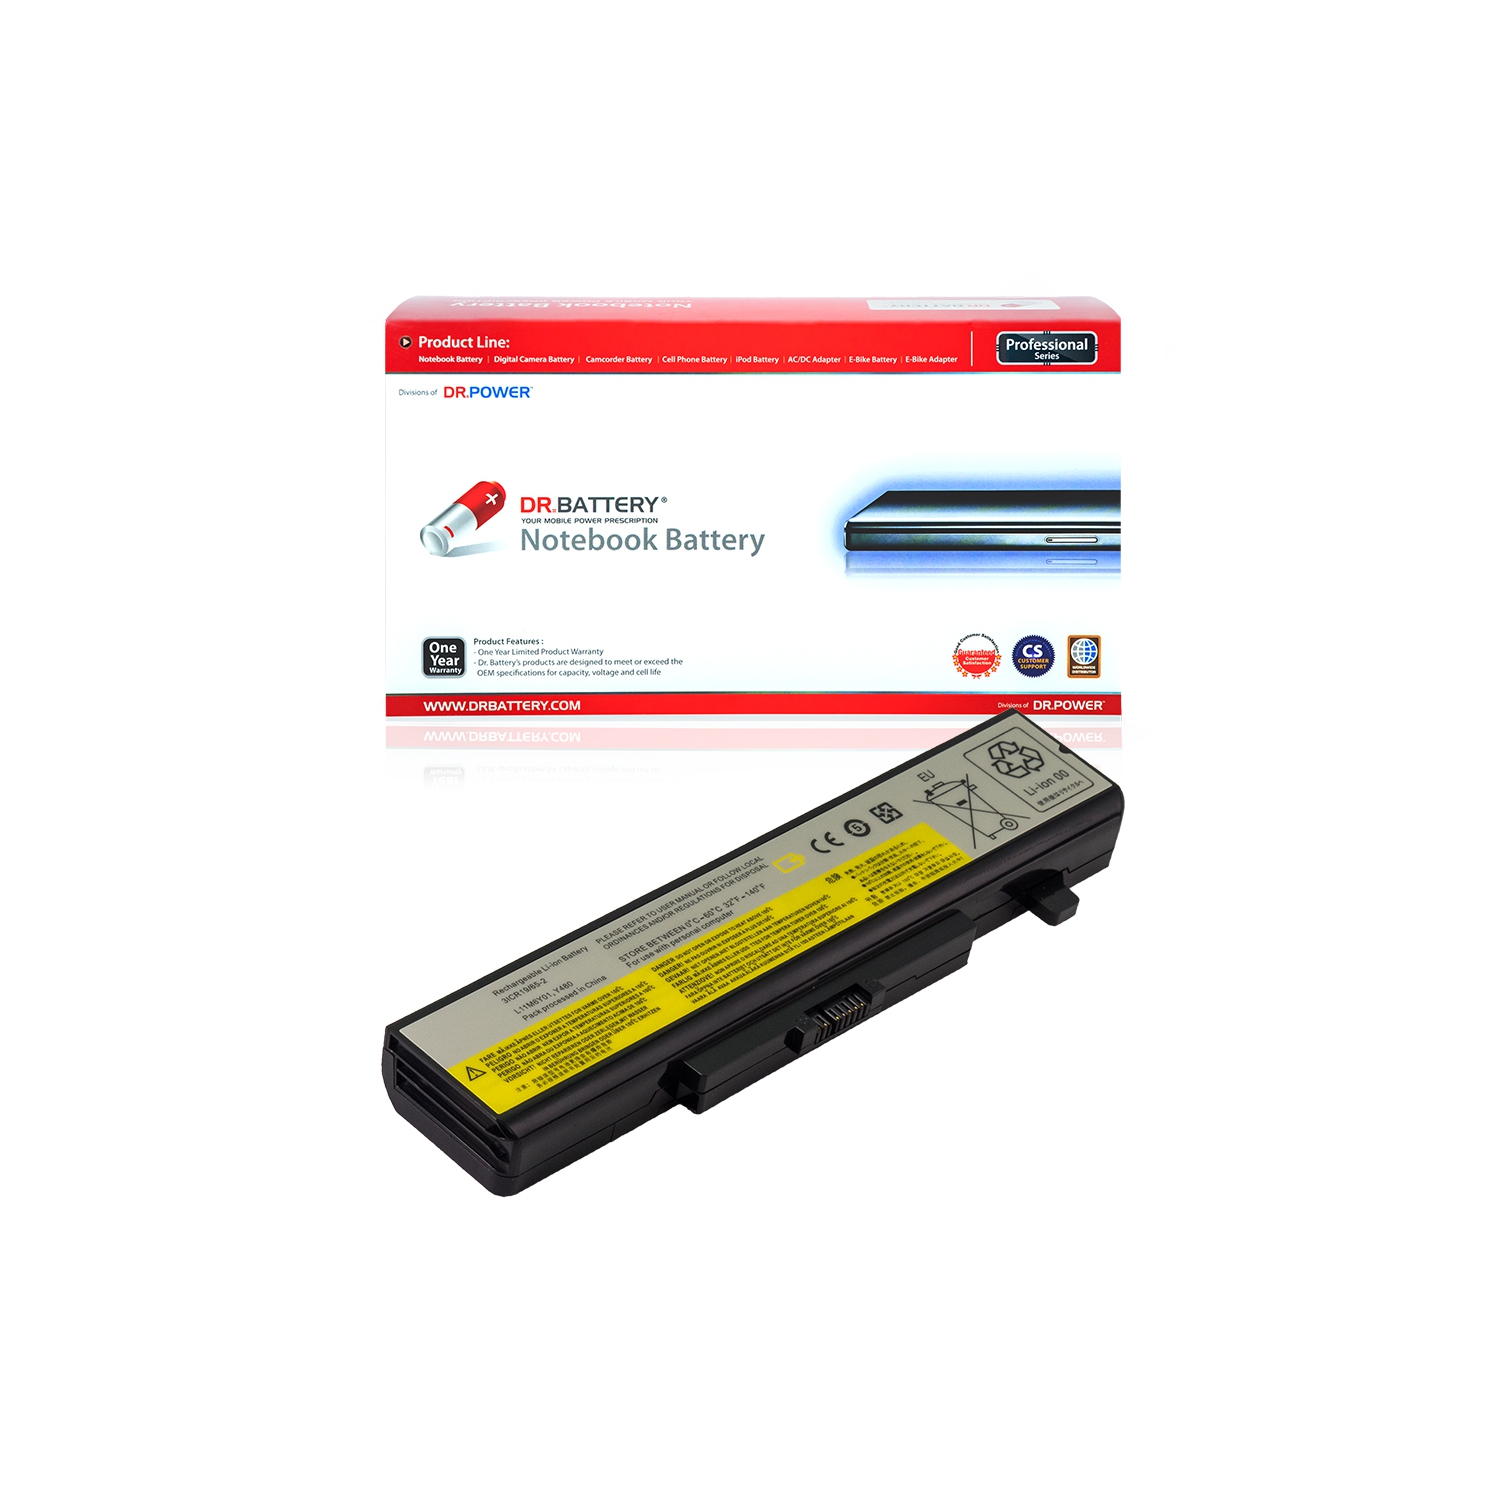 DR. BATTERY - Replacement for Lenovo Essential B580 / B590 / G480 / G485 / 121500049 / 121500050 / 121500052 / 121500053